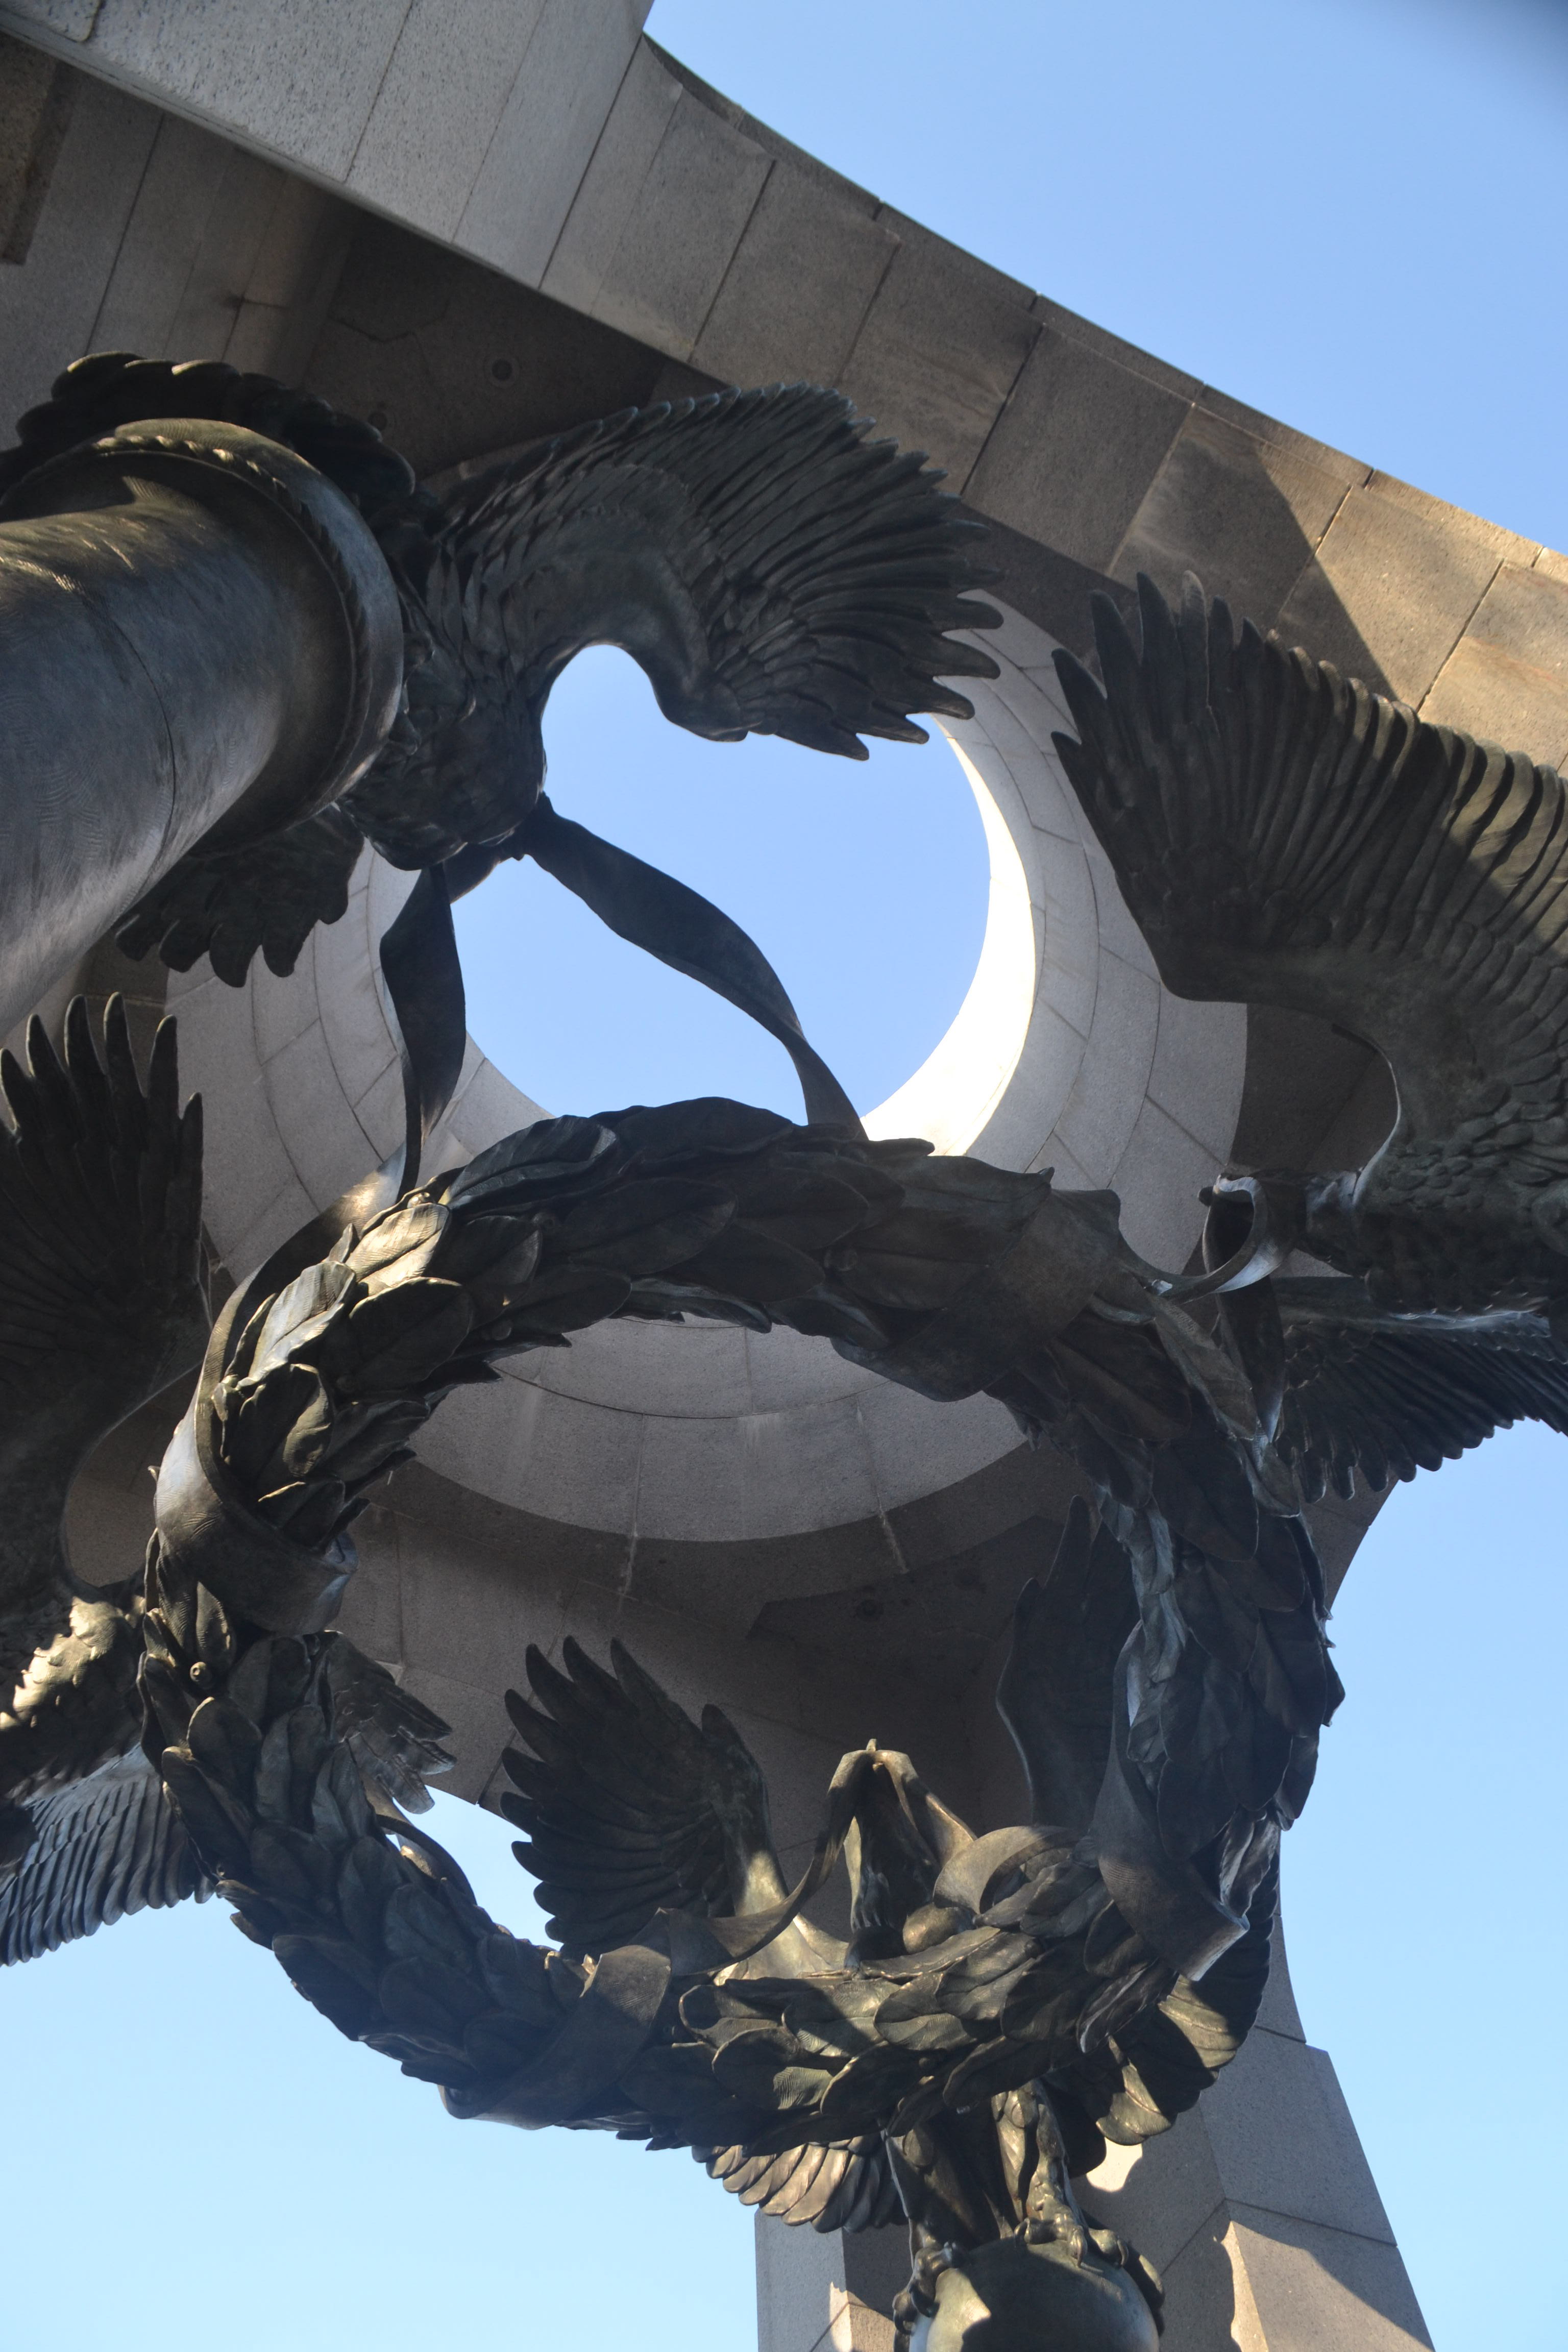 Four metallic eagles, wings spread, support a wreath by a ribbon in their beaks, beneath a stone, triumphal arch.